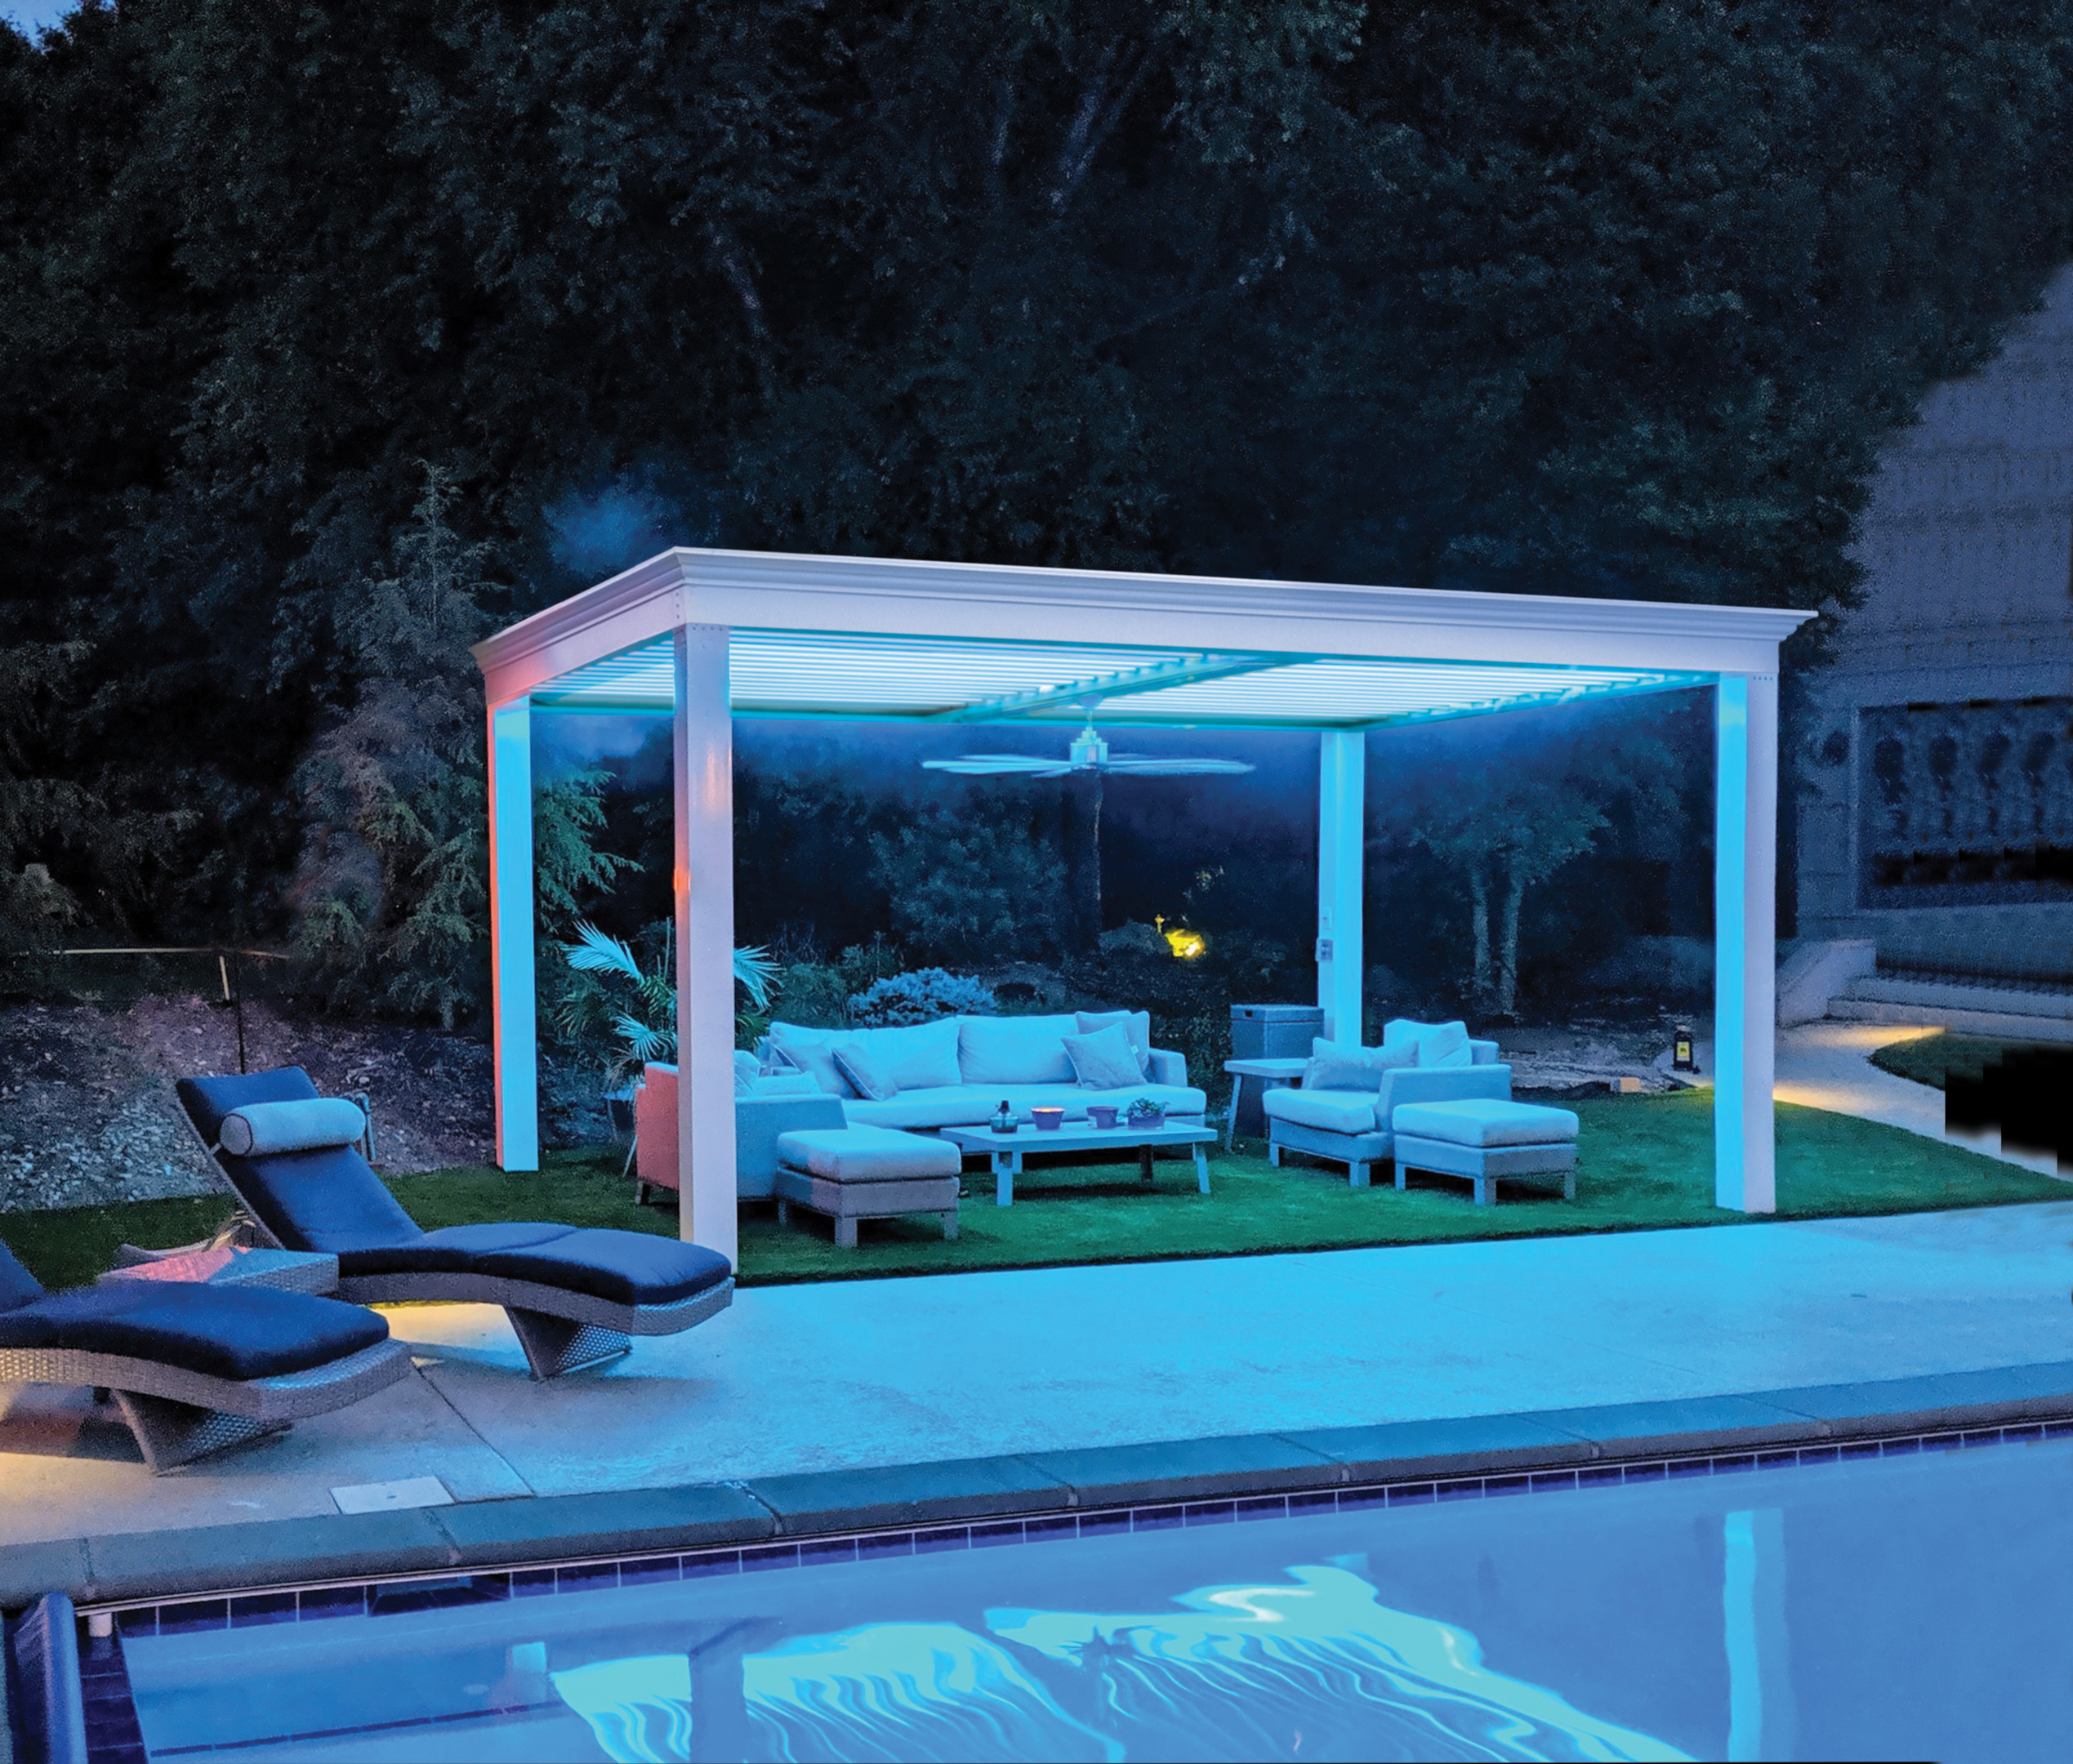 Pergola using led lighting near roof to elevate their outdoor space